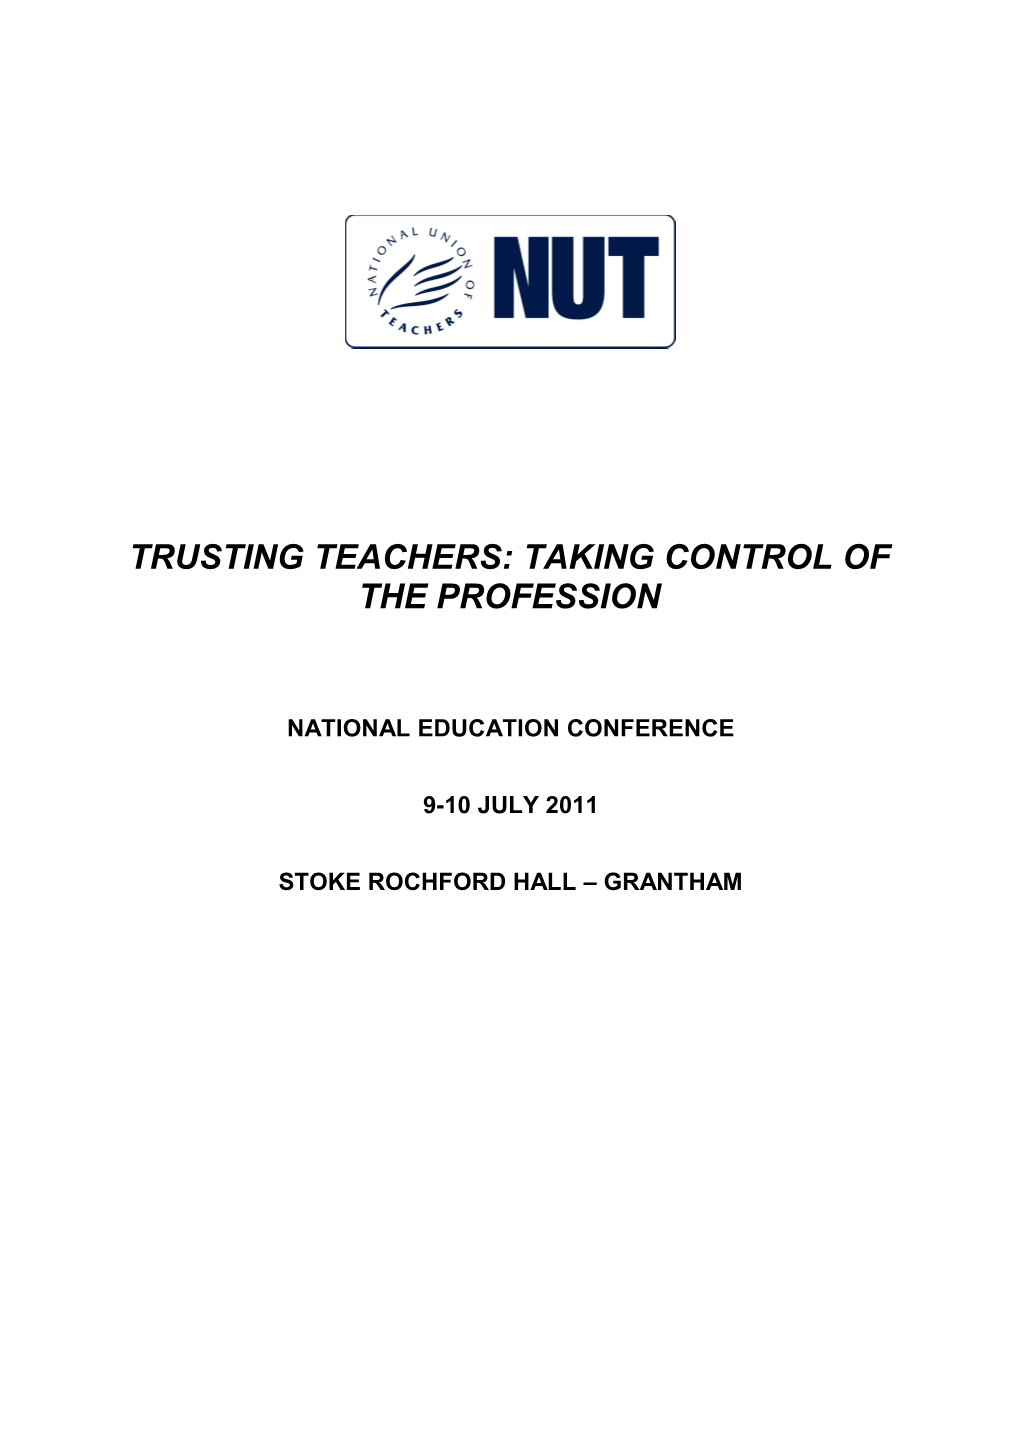 Trusting Teachers: Taking Control of the Profession